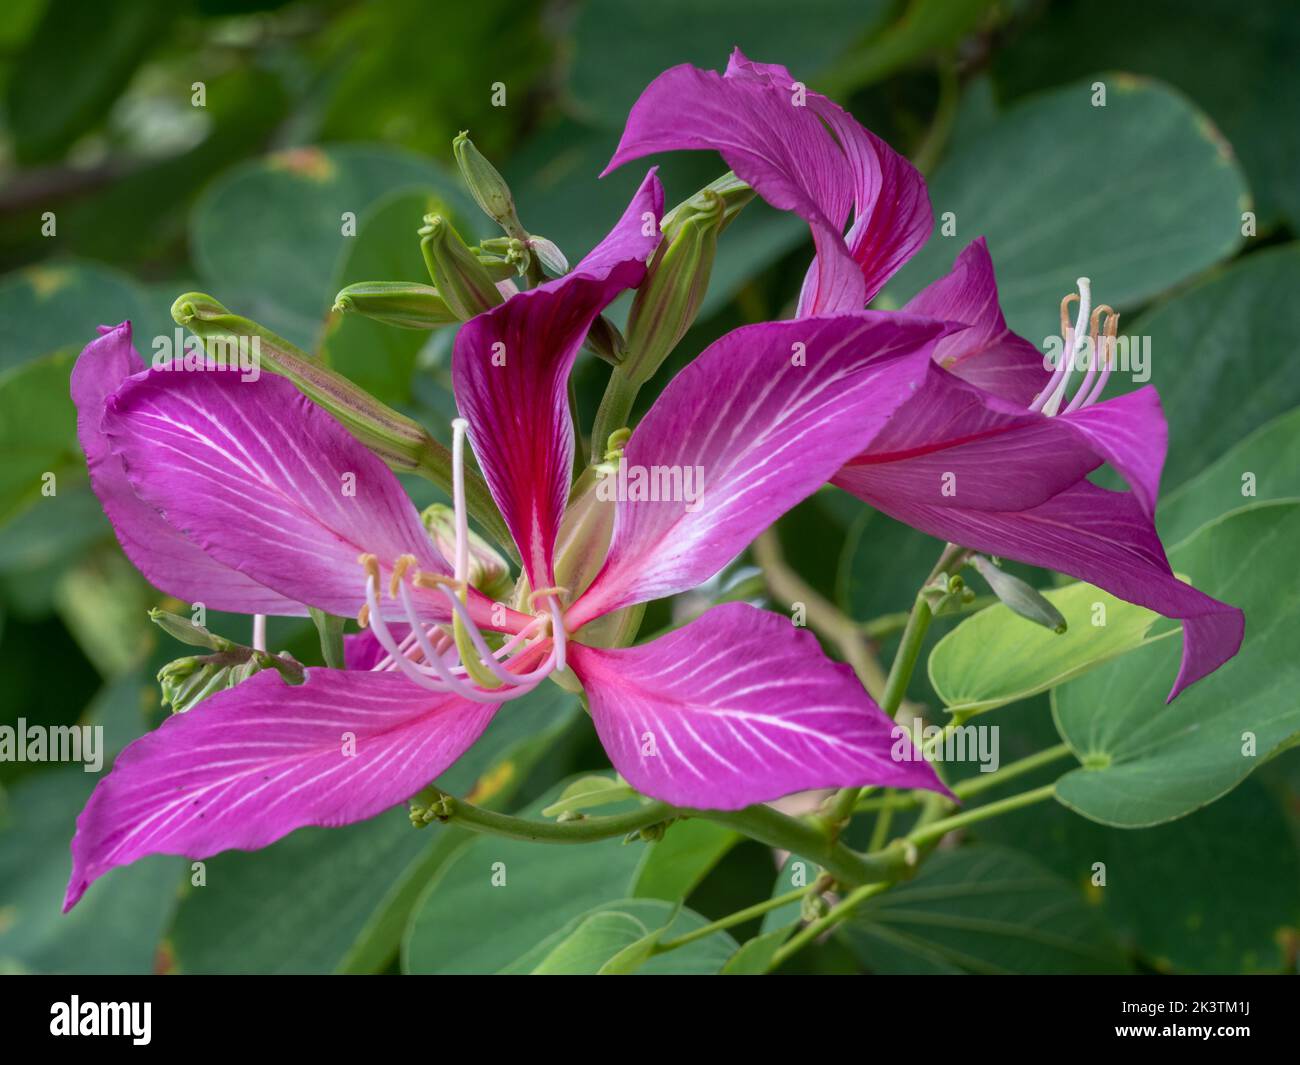 Closeup view of colorful purple pink flowers and buds of the tropical bauhinia blakeana aka orchid tree Stock Photo